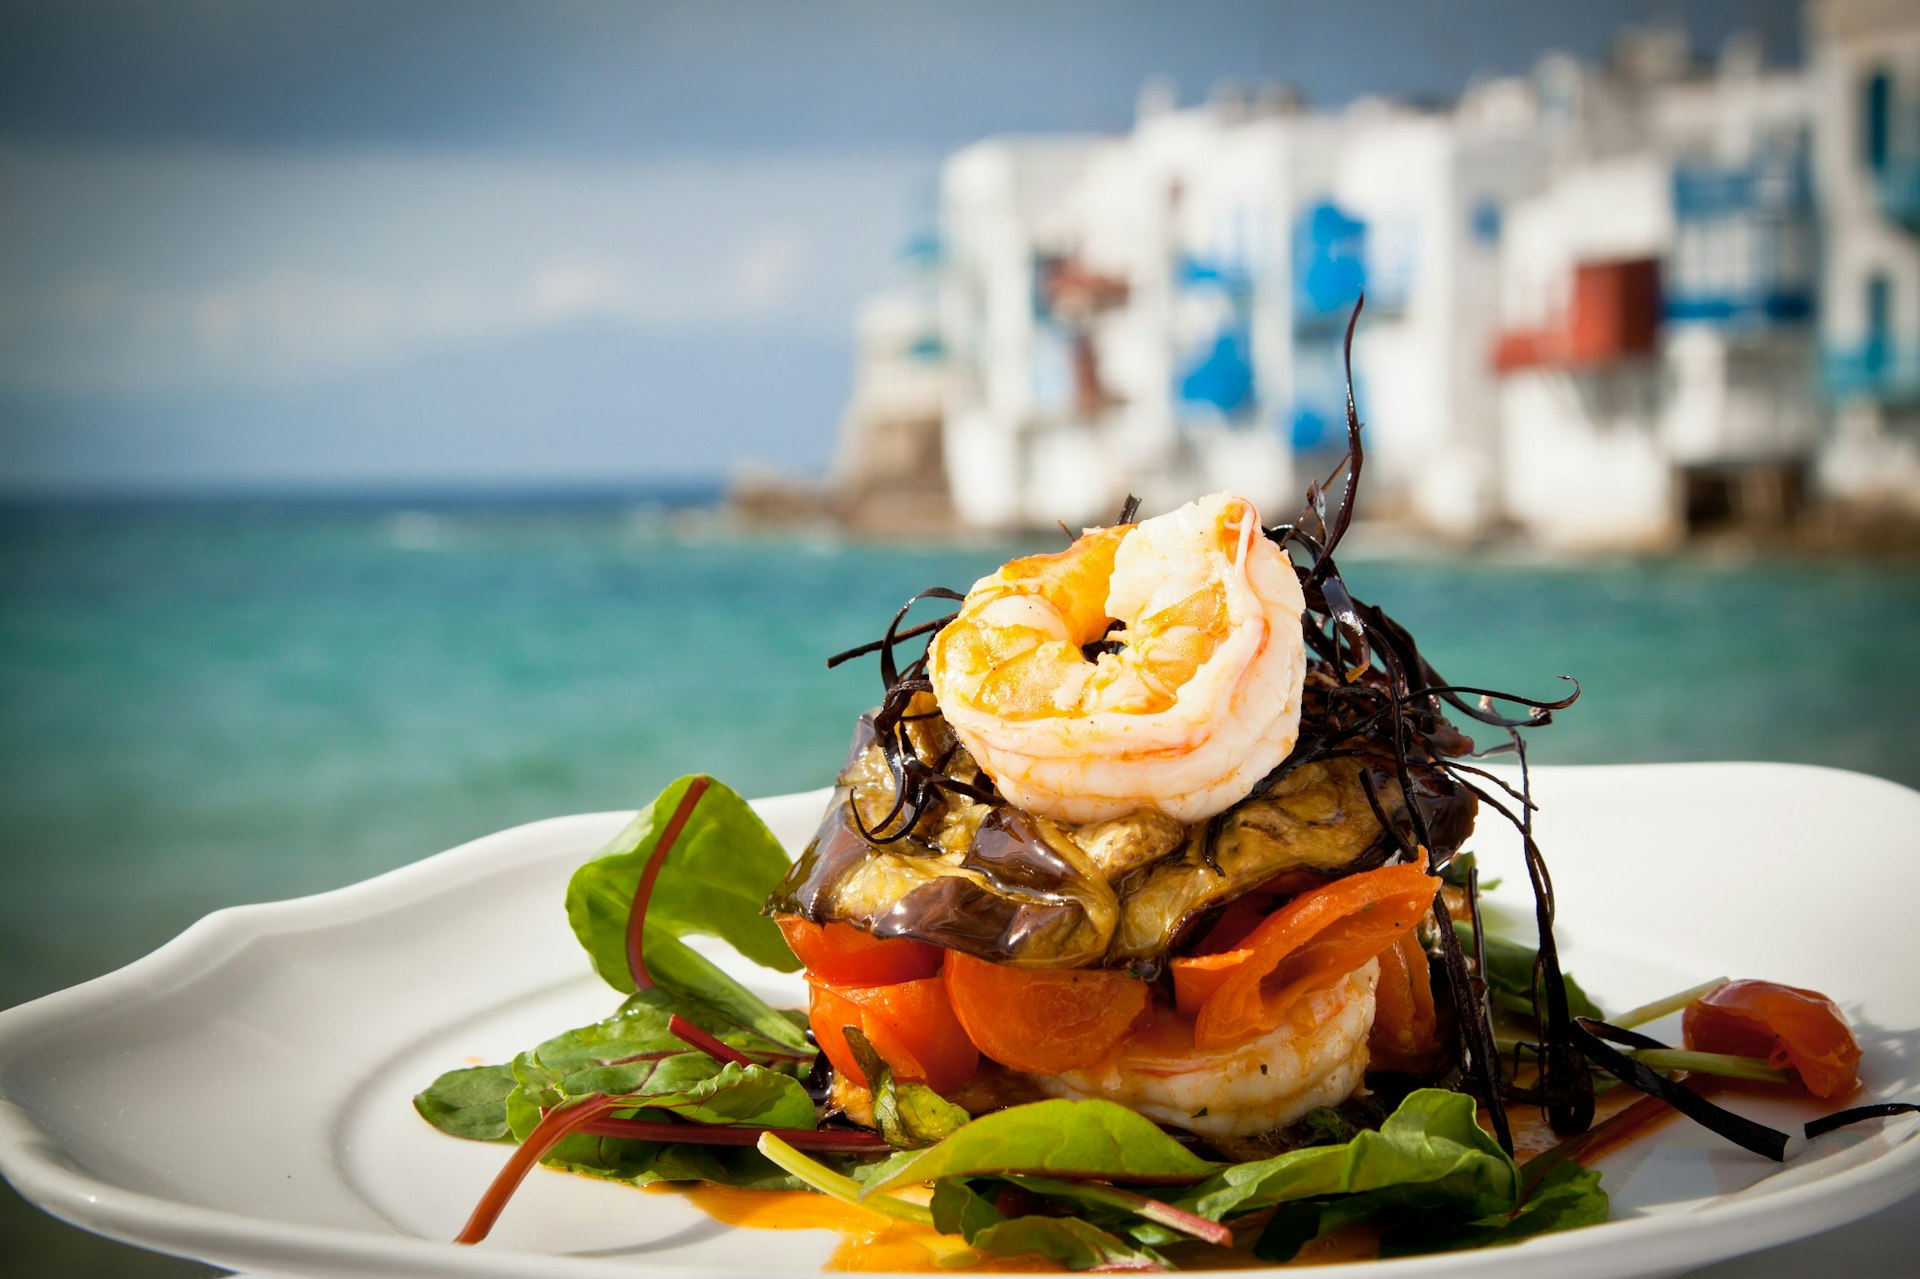 A plate of seafood including prawns on a bed of salad. The sea is turquoise in the background